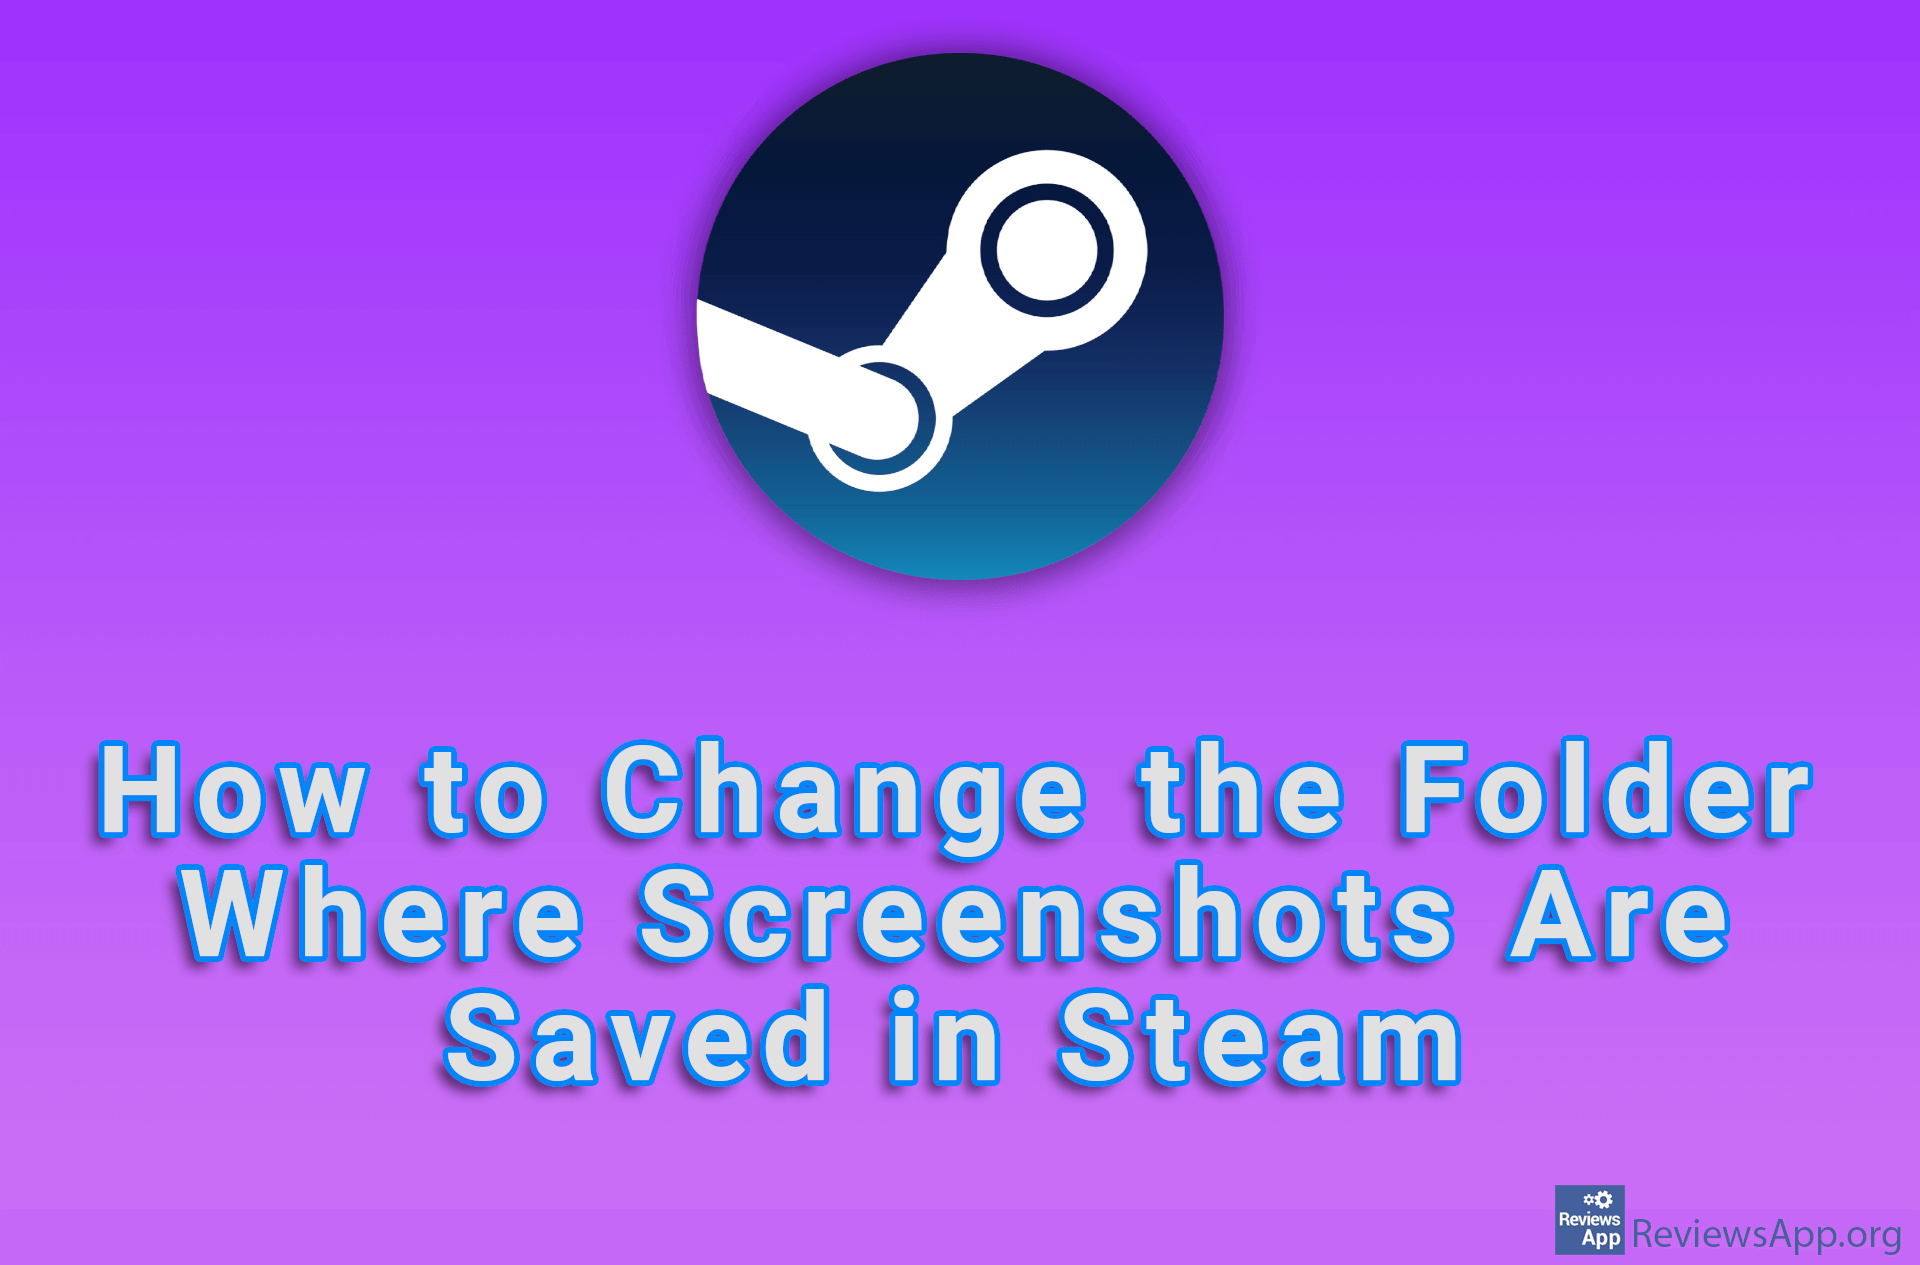 How to Change the Folder Where Screenshots Are Saved in Steam